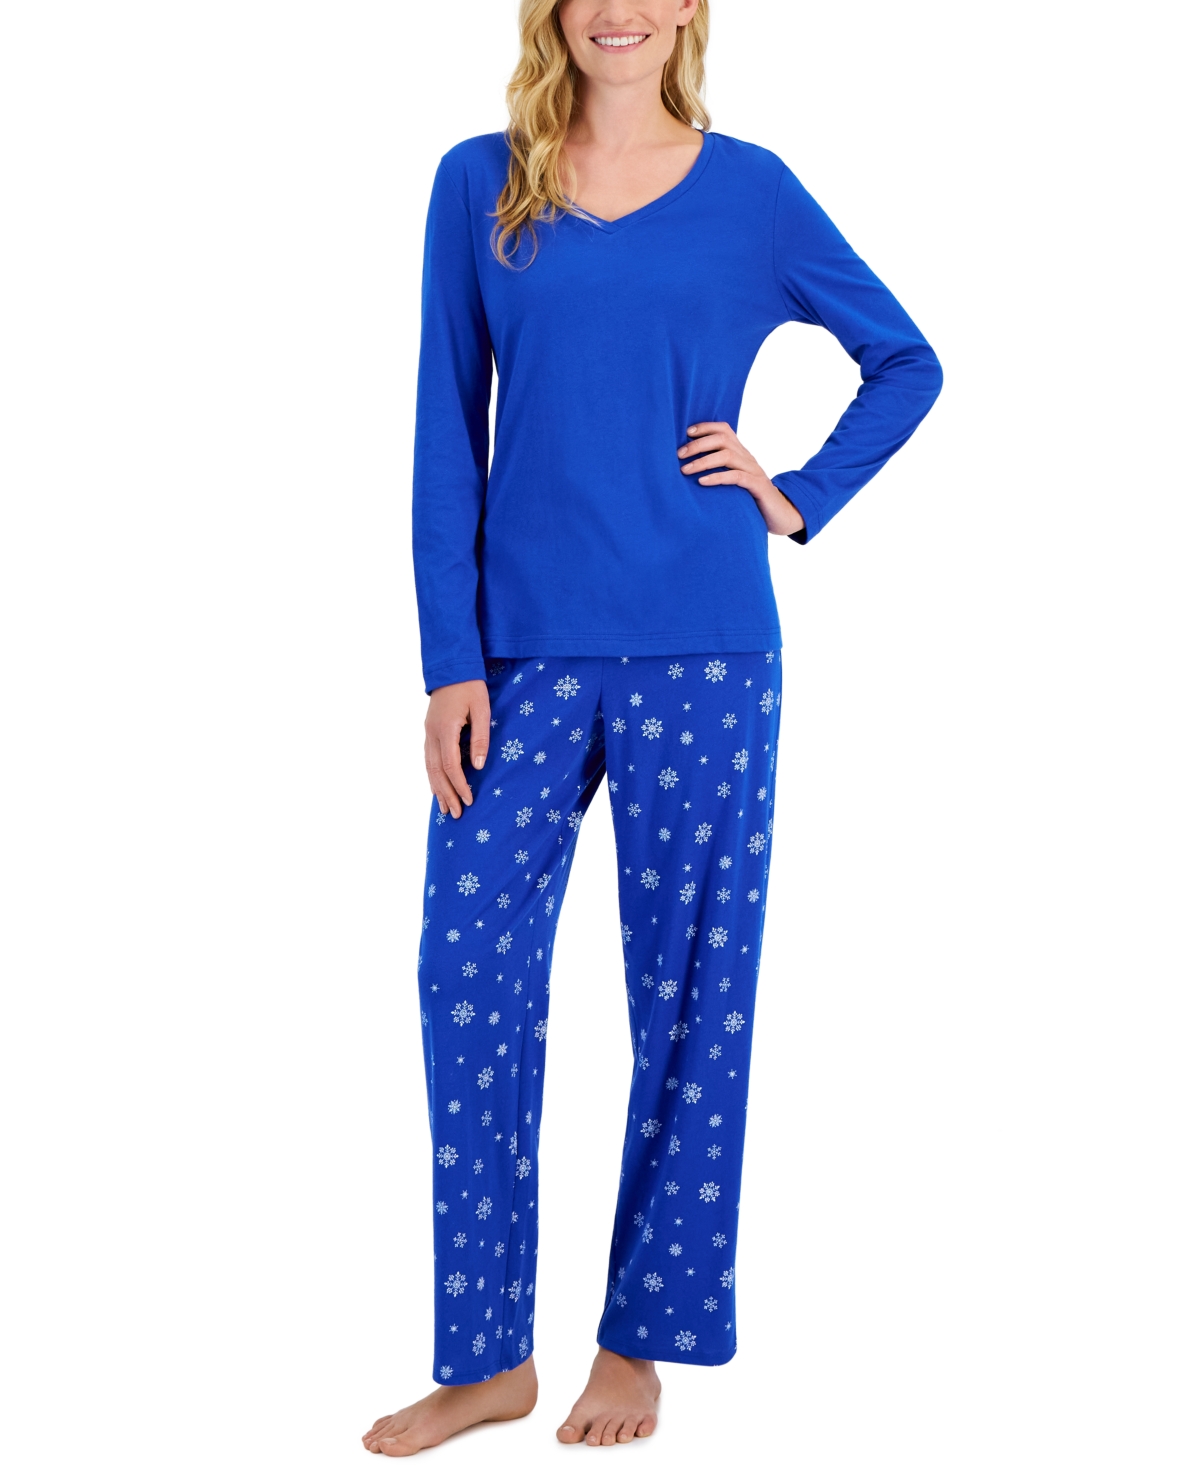 Charter Club Women's 2-Pc. Cotton V-Neck Packaged Pajama Set